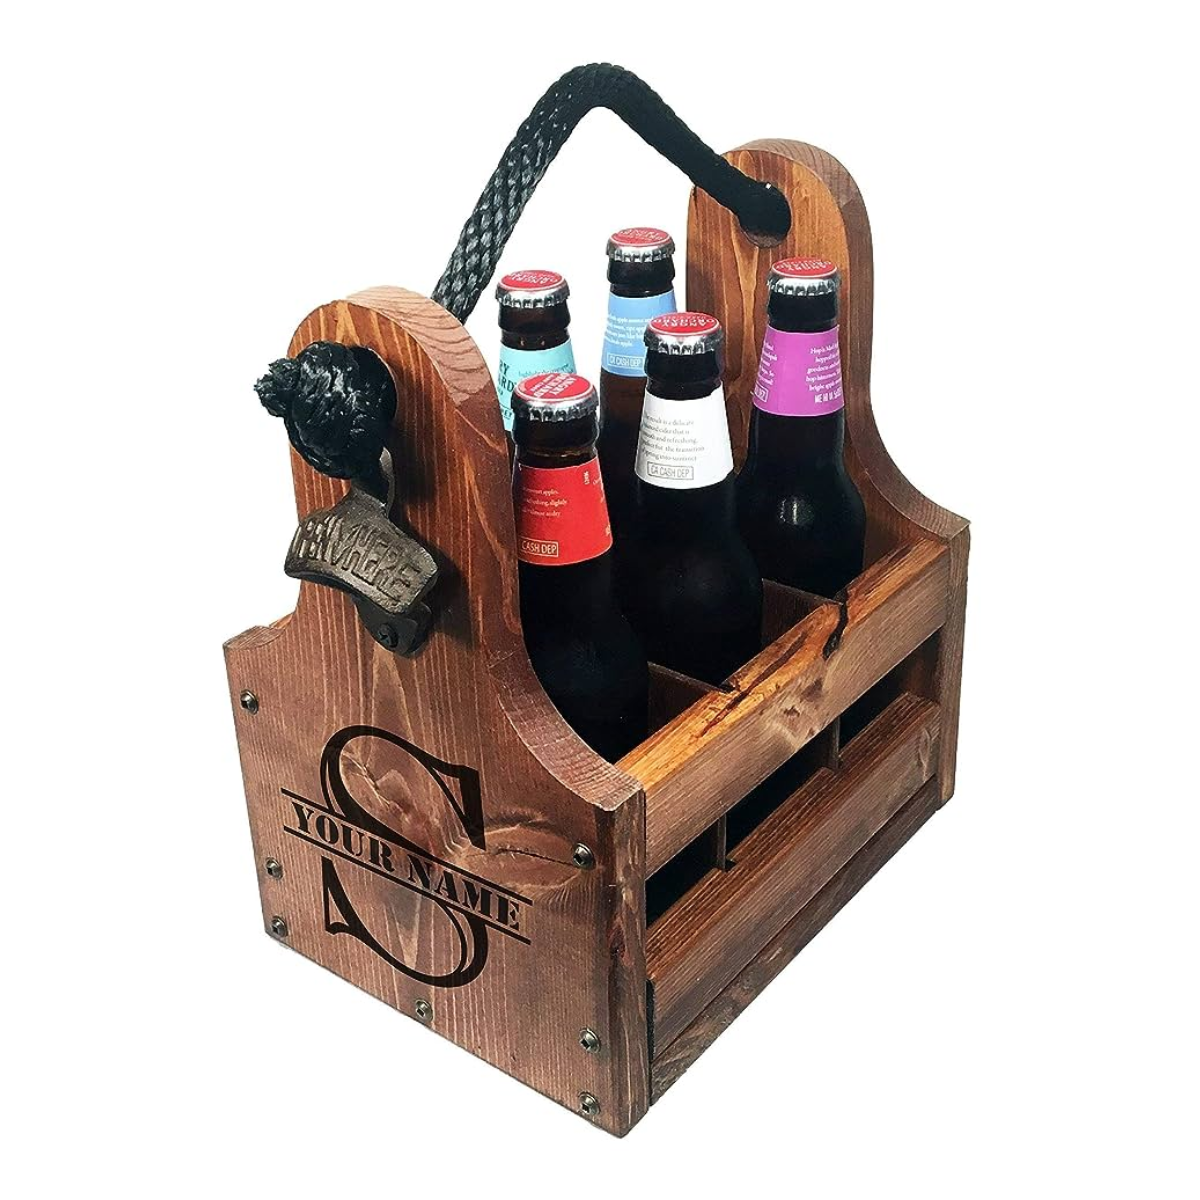 18. Rustic Wooden Beer Caddy: A Unique 2 Year Anniversary Gift for Him